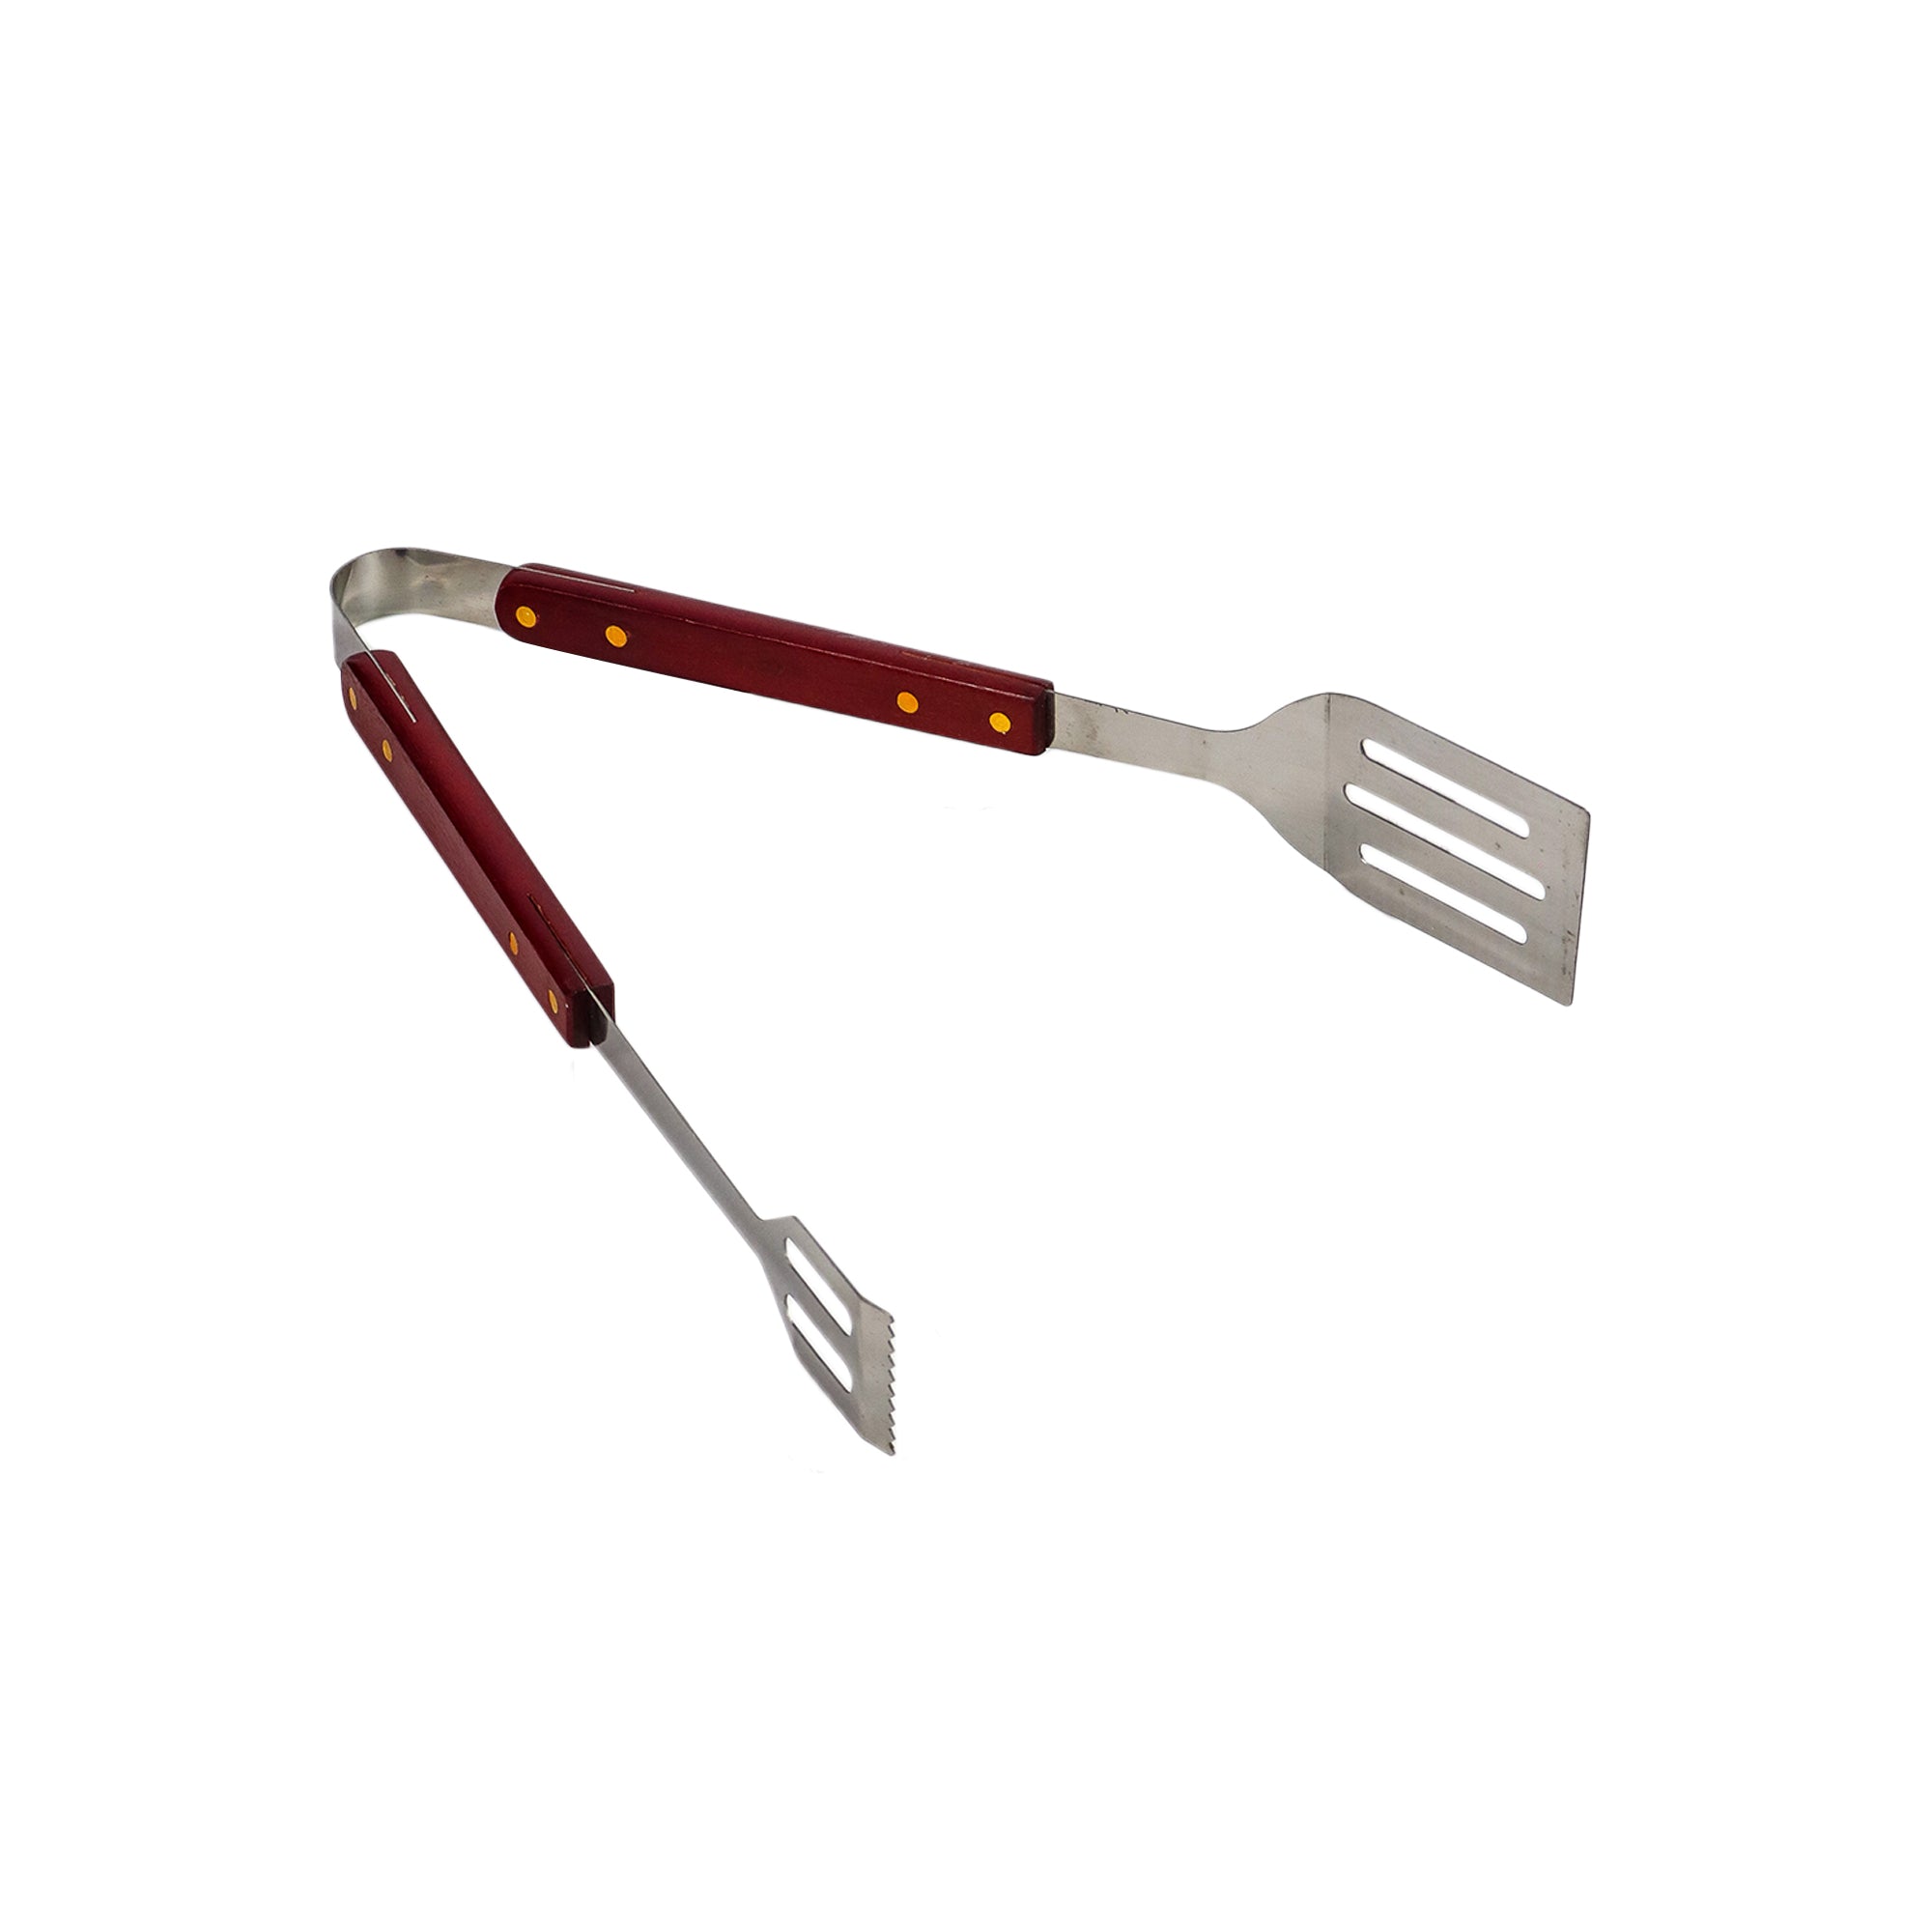 BBQ Braai Tong Stainless Steel with Wood handle